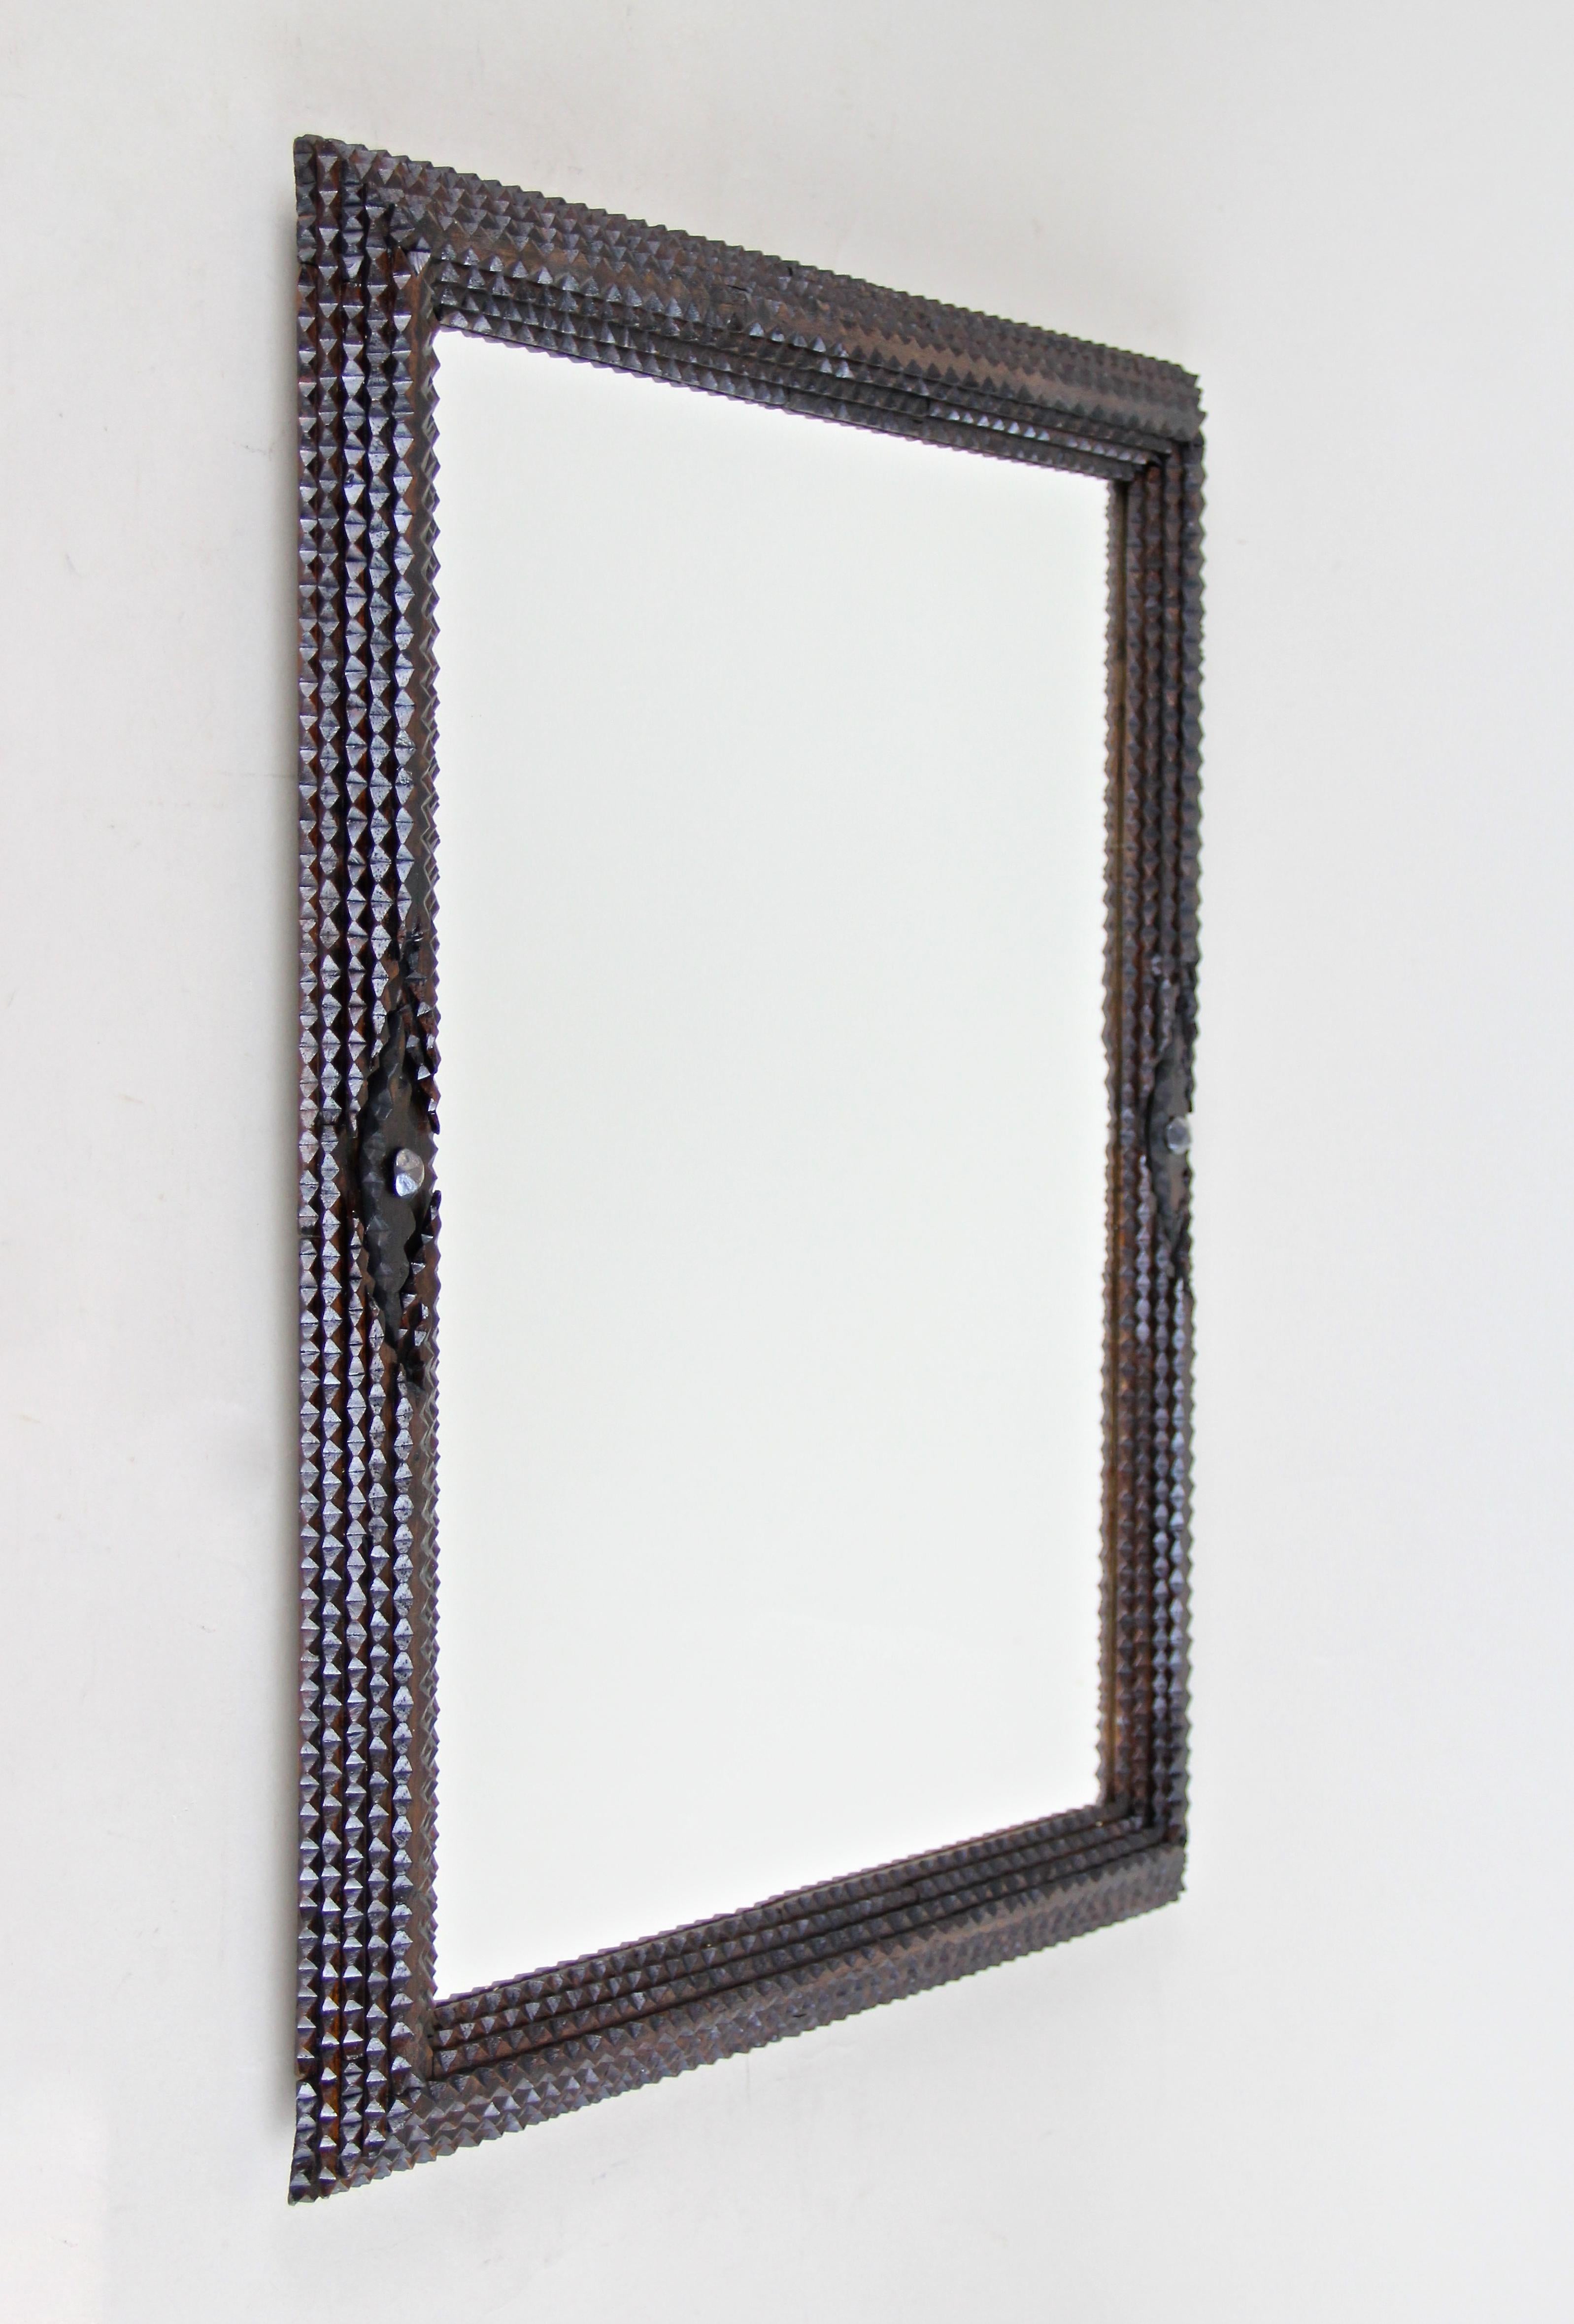 Charming rustic tramp art mirror from the late 19th century, circa 1880. This Austrian wooden wall mirror has been hand carved out of basswood and shows a light varnish sealed surface. The broad frame impresses with elaborate chip carvings and two